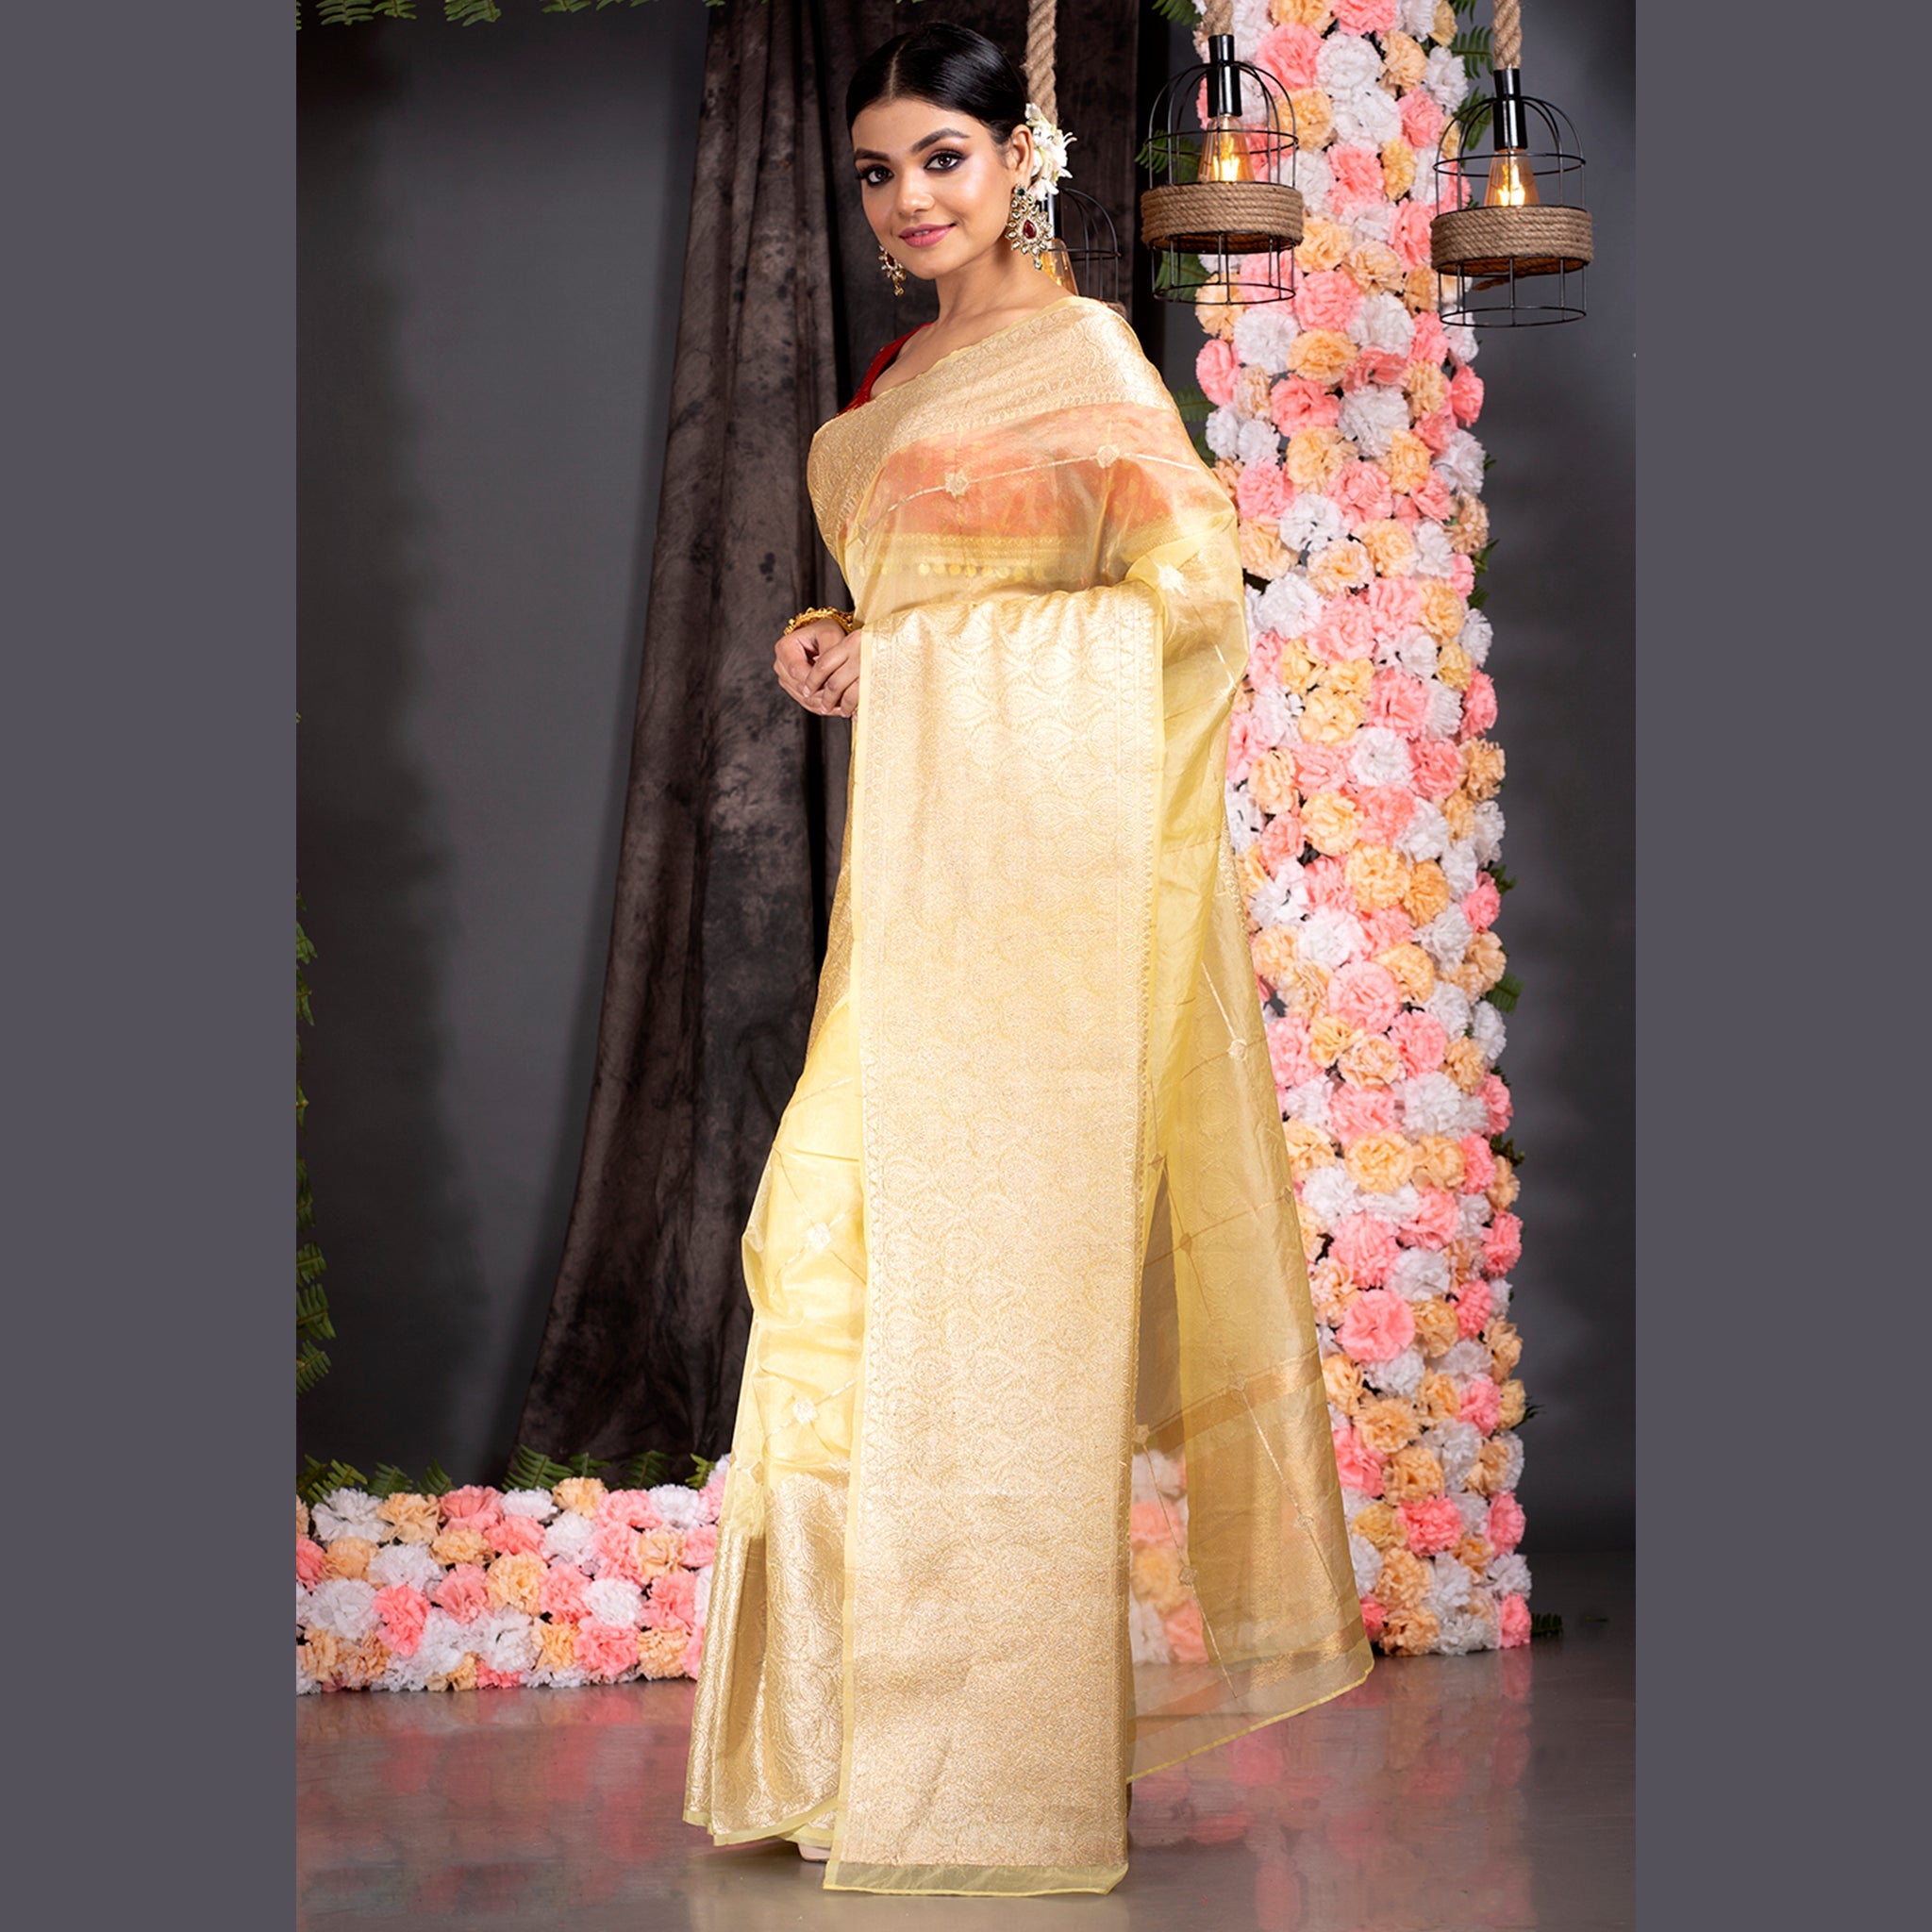 Women's Yellow Organza Saree With Square Motifs And Ambi Jaal Border - Boveee